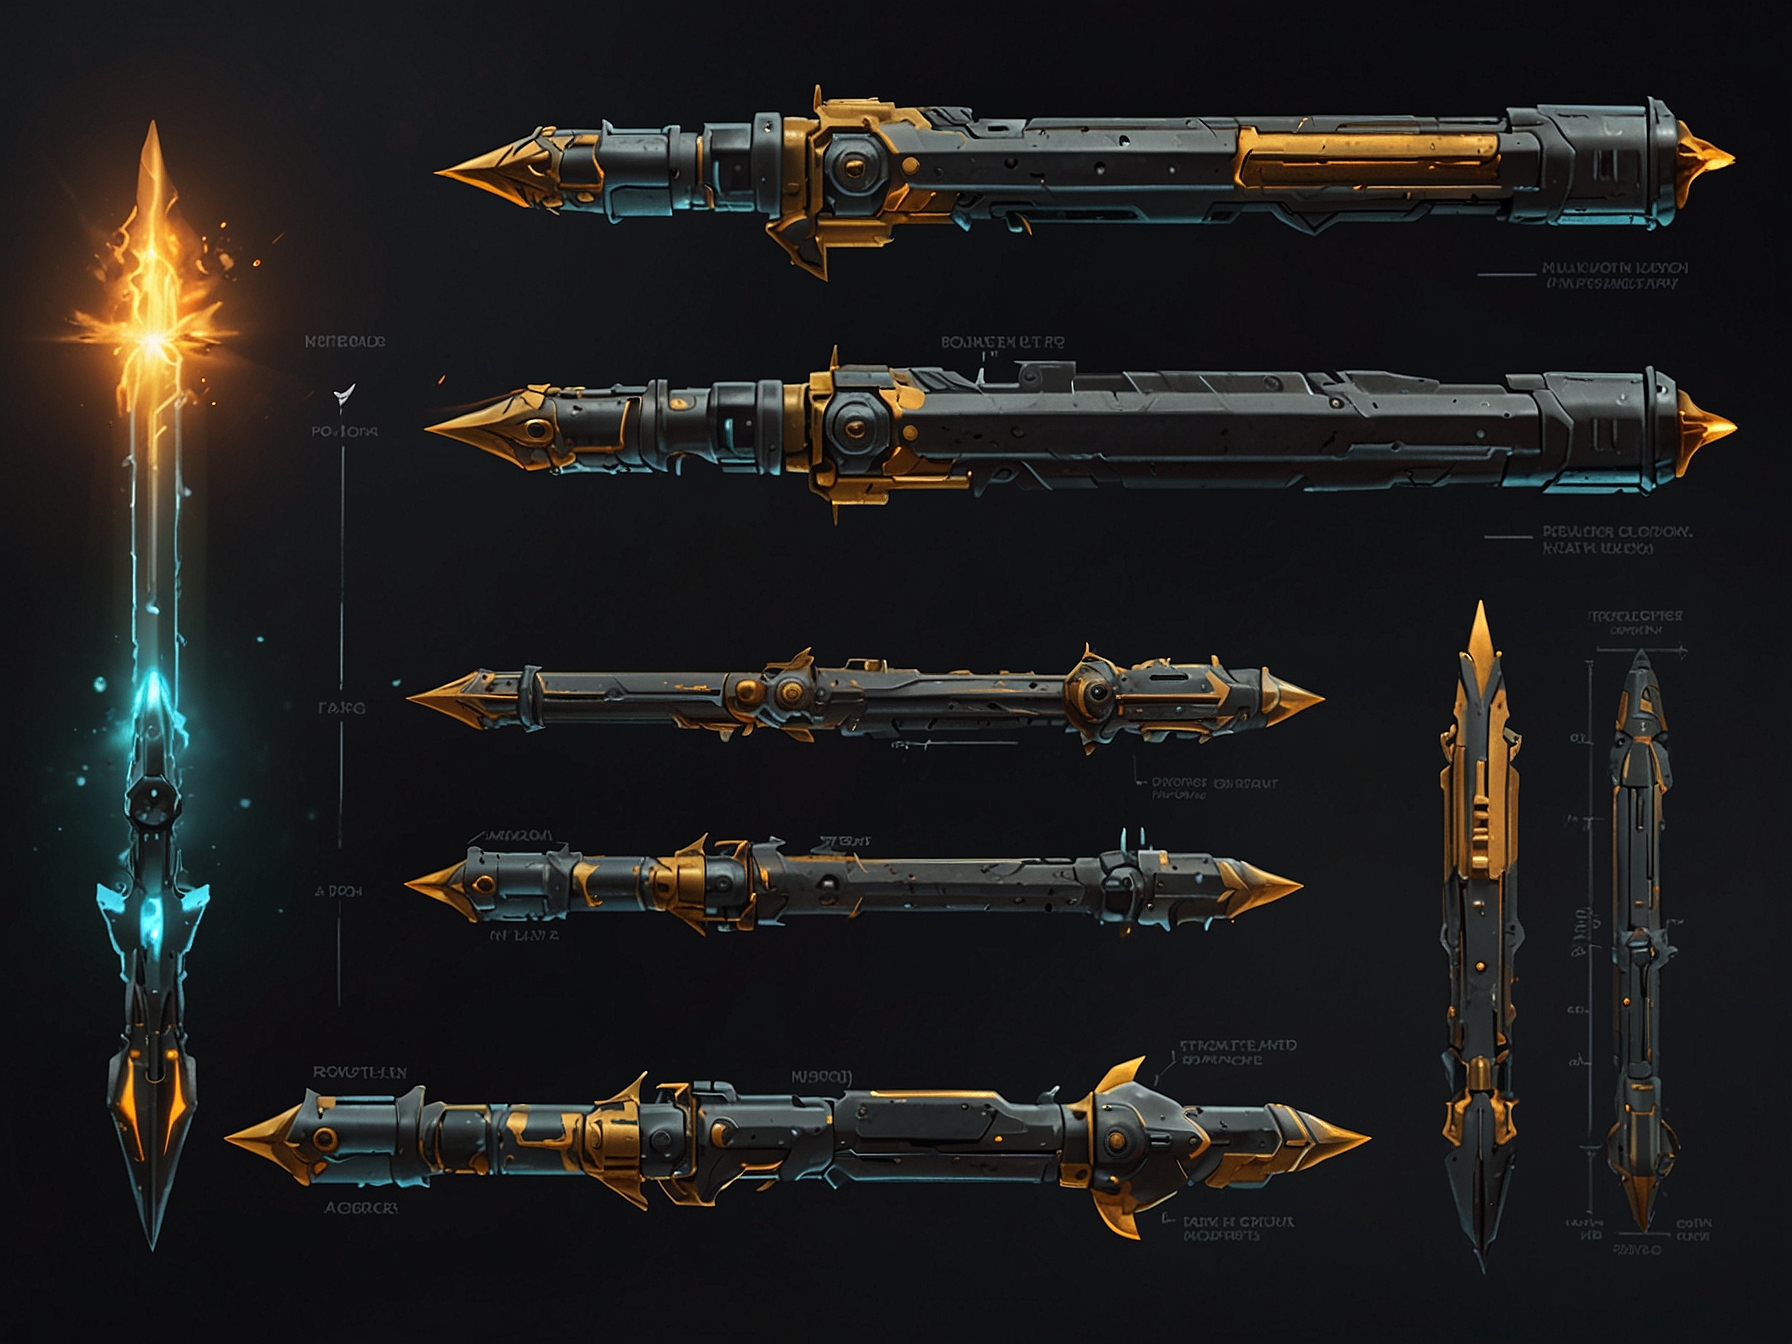 An image showcasing the improvements made to the Spear weapon in Helldivers 2, highlighting its refined hitbox detection and consistent damage output against enemies.